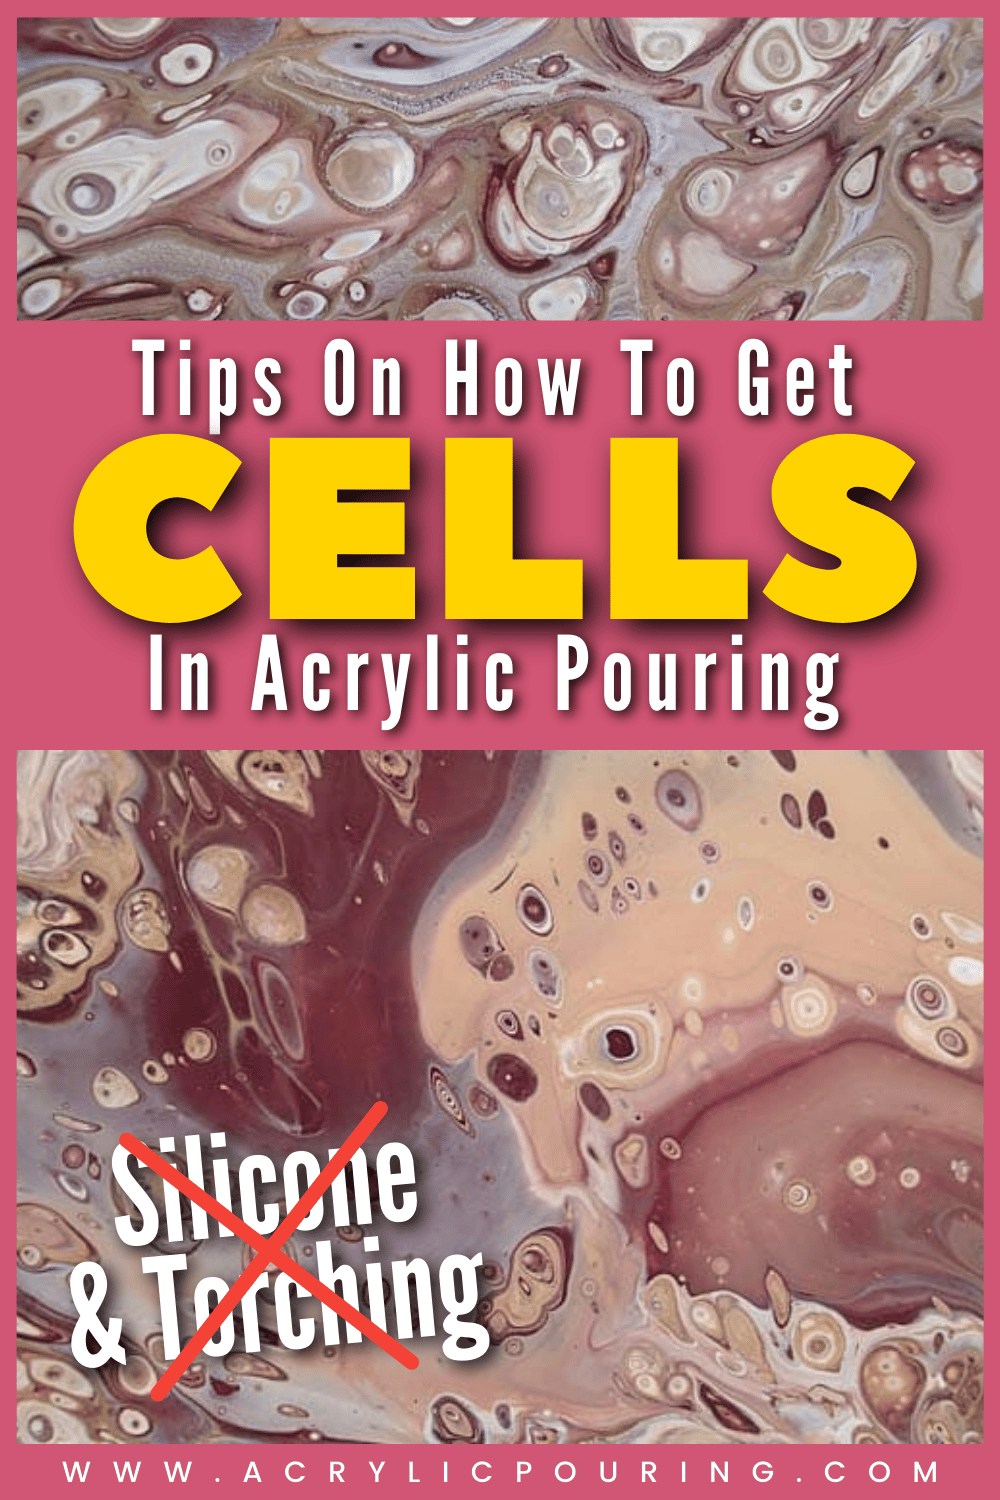 Amazing cells without adding any silicone. No torching – just straight out of the cup it was perfect, and the cells moved beautifully, didn’t break up at all during the tilt. I loved it! What a fabulous result and quite unexpected.